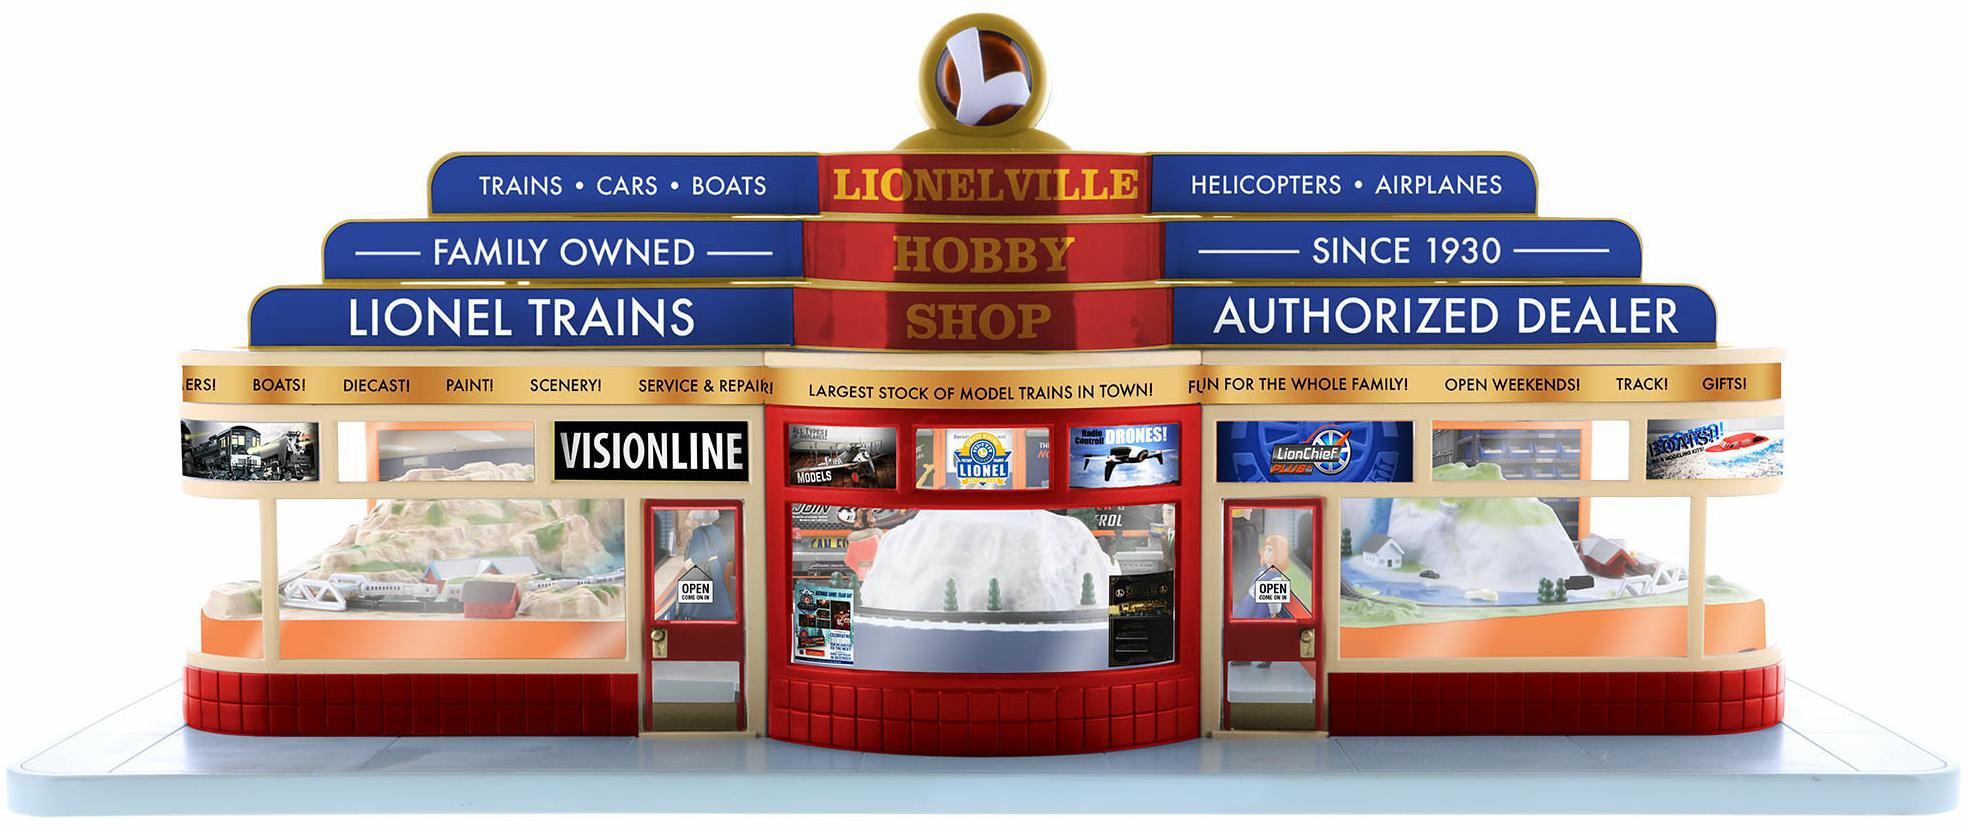 Plug-Expand-Play Lionelville Hobby Shop image